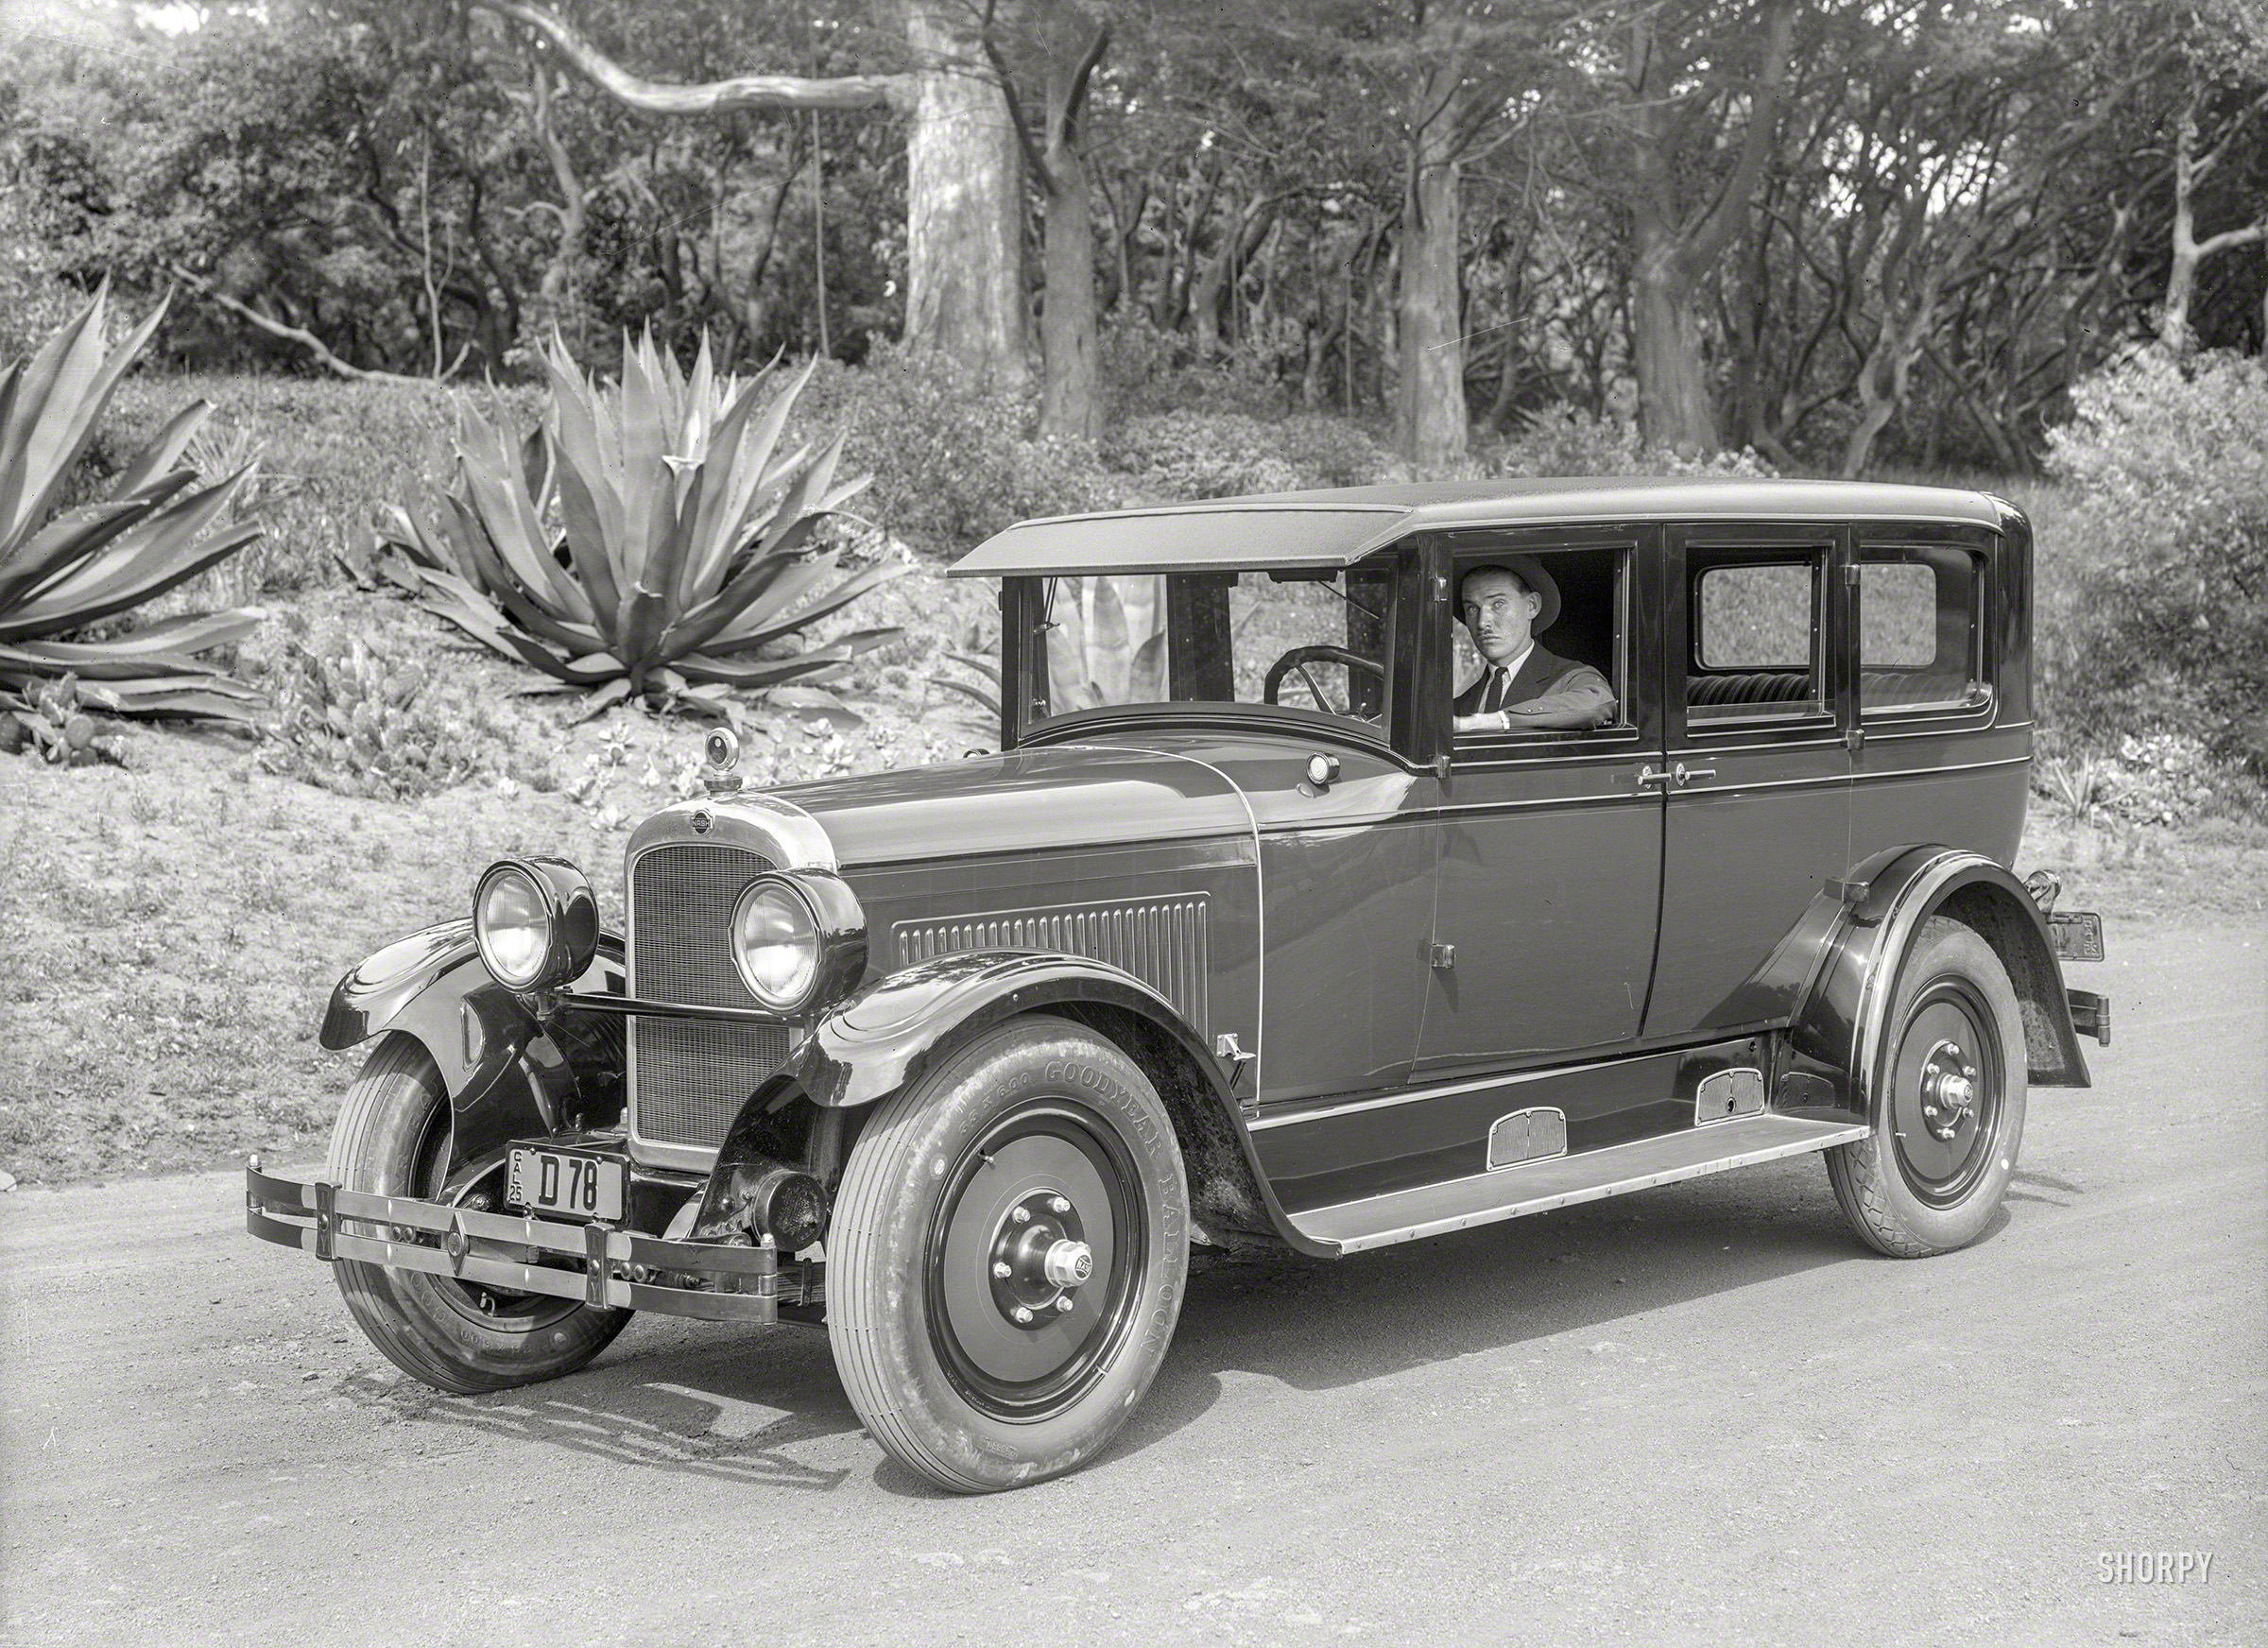 San Francisco, 1925. "Nash Advanced Six at Golden Gate Park." Which of you kids would like some candy? 5x7 glass negative by Christopher Helin. View full size.